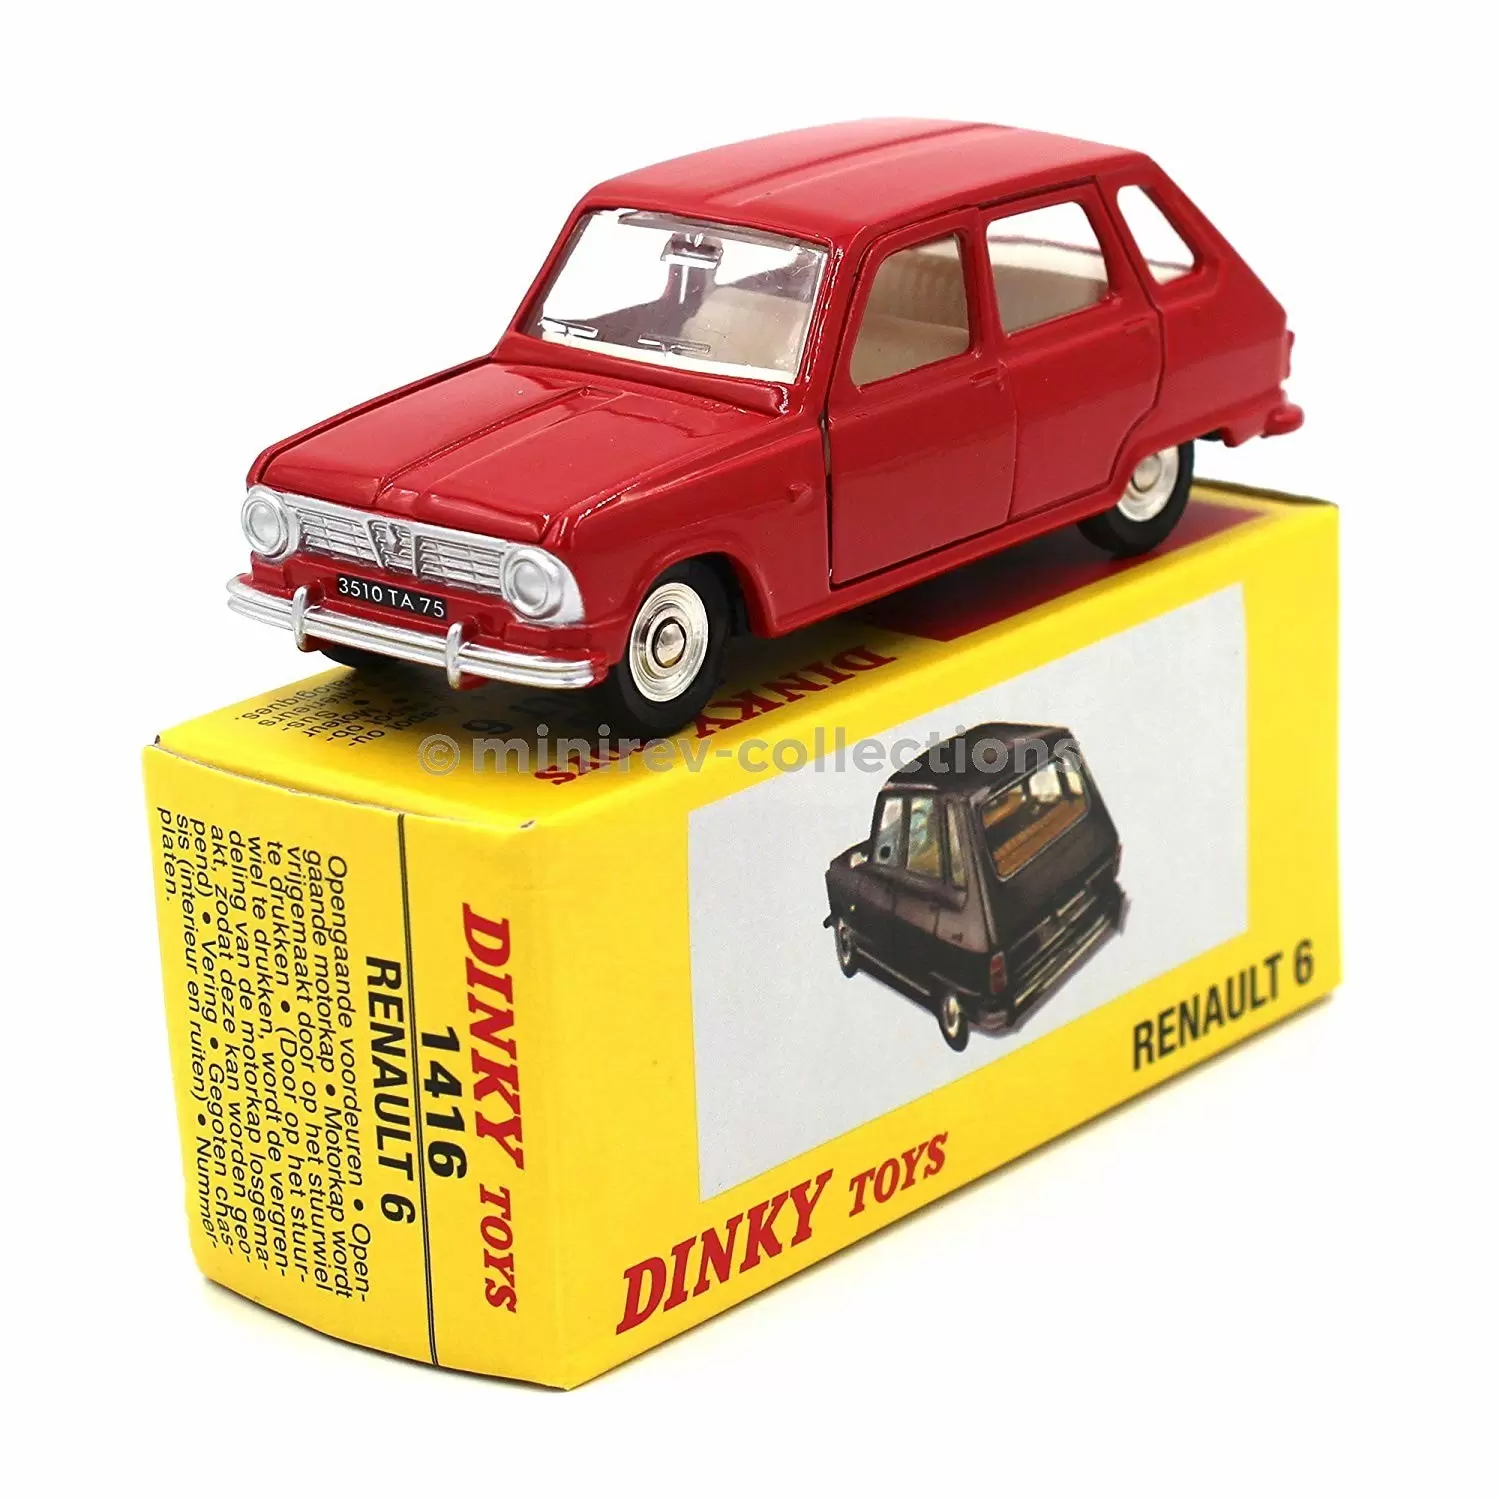 Atlas - Classic Dinky Toys Collection - RENAULT 6 (Rouge)